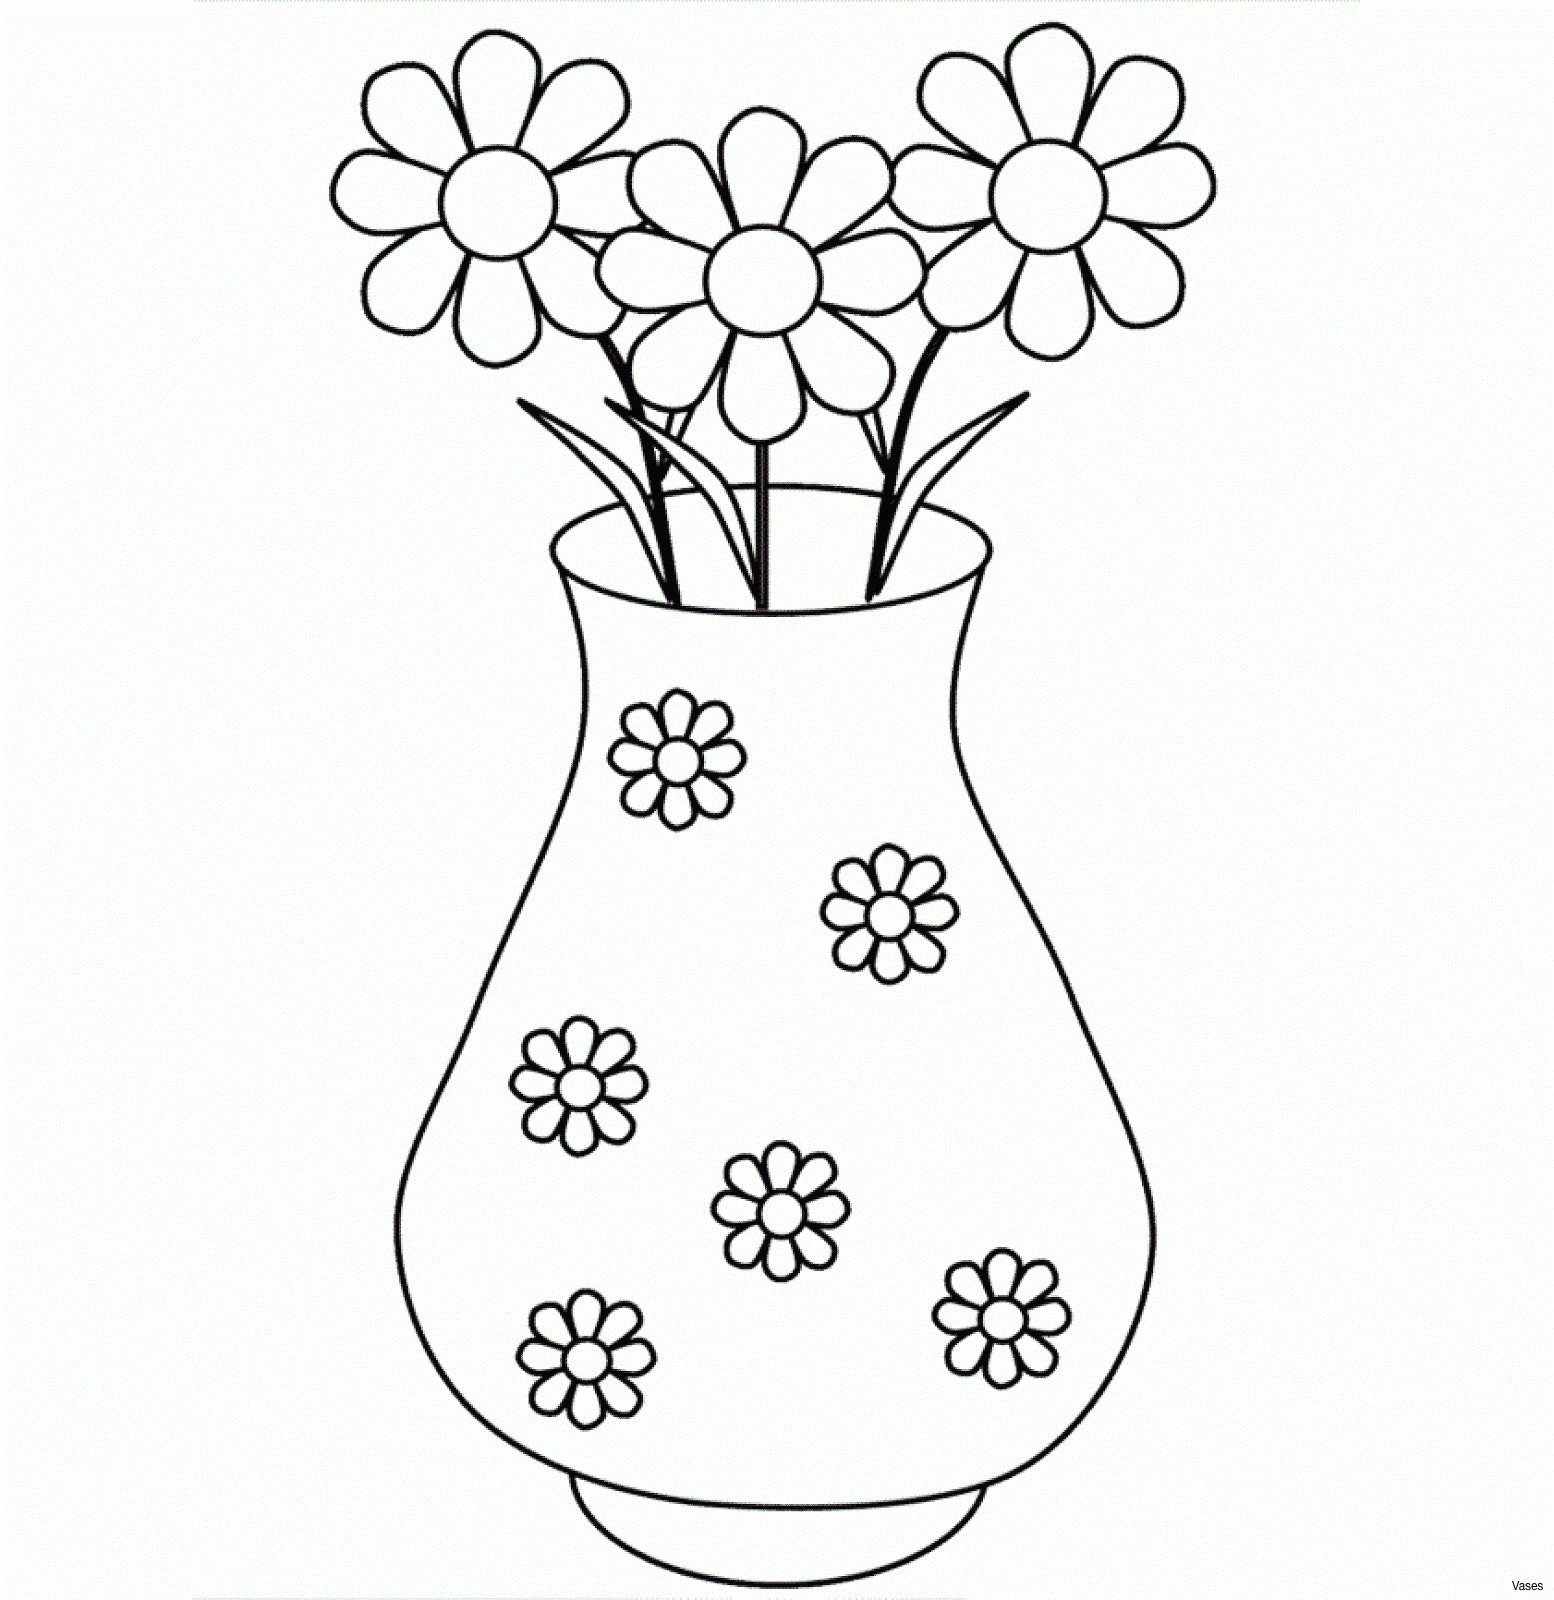 Drawings Of Flower Bouquets Flowers to Draw Easy Step by Step Prslide Com